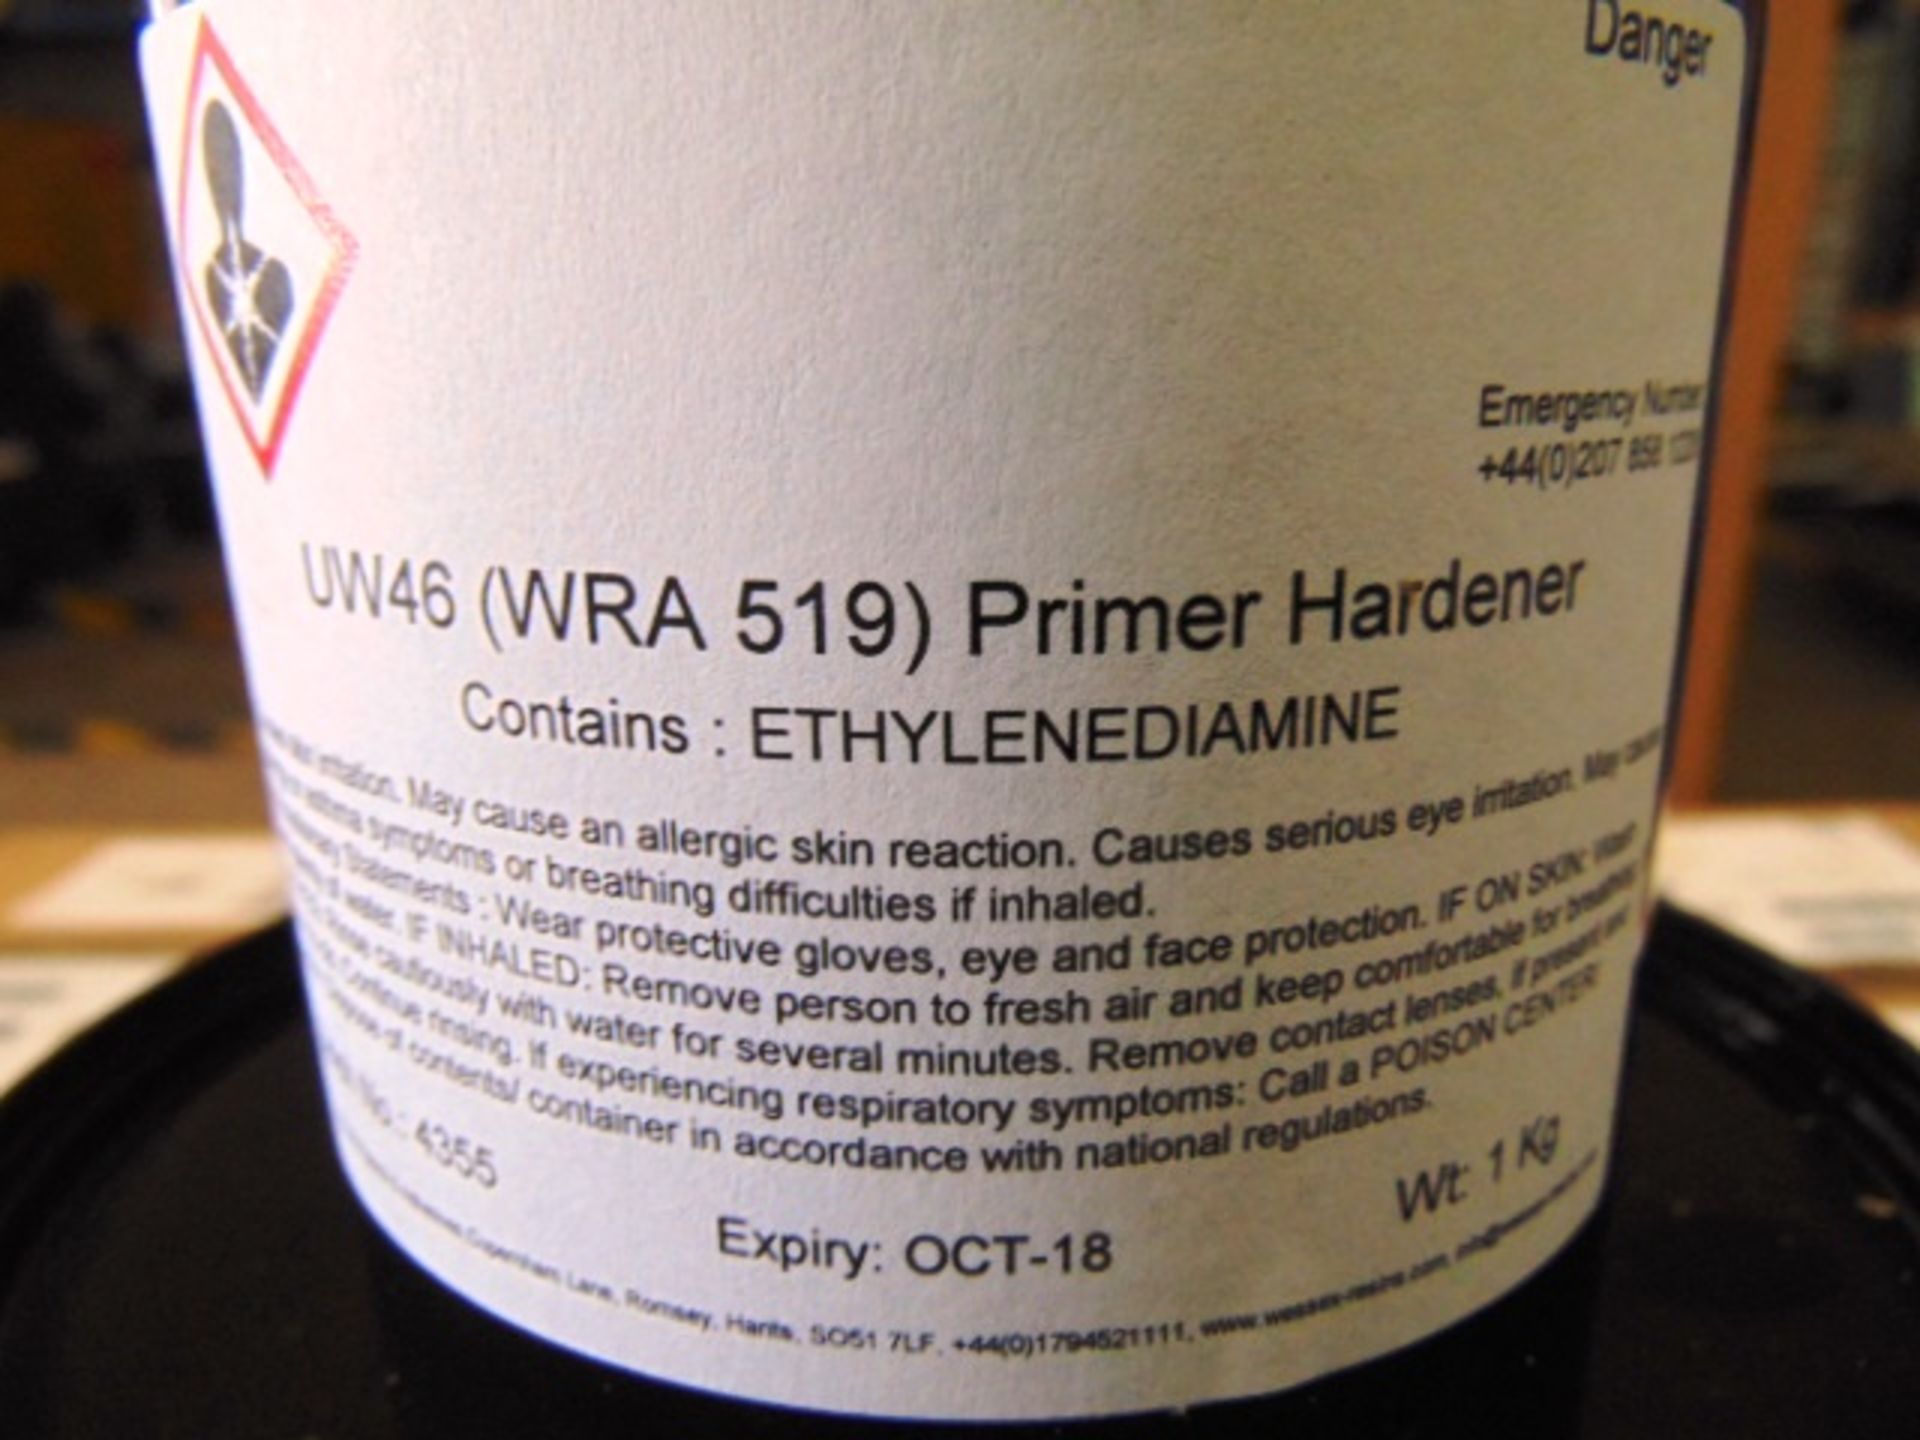 7 x Unissued Cans of UW46 (WRA519) Epoxy Resin - Image 4 of 5